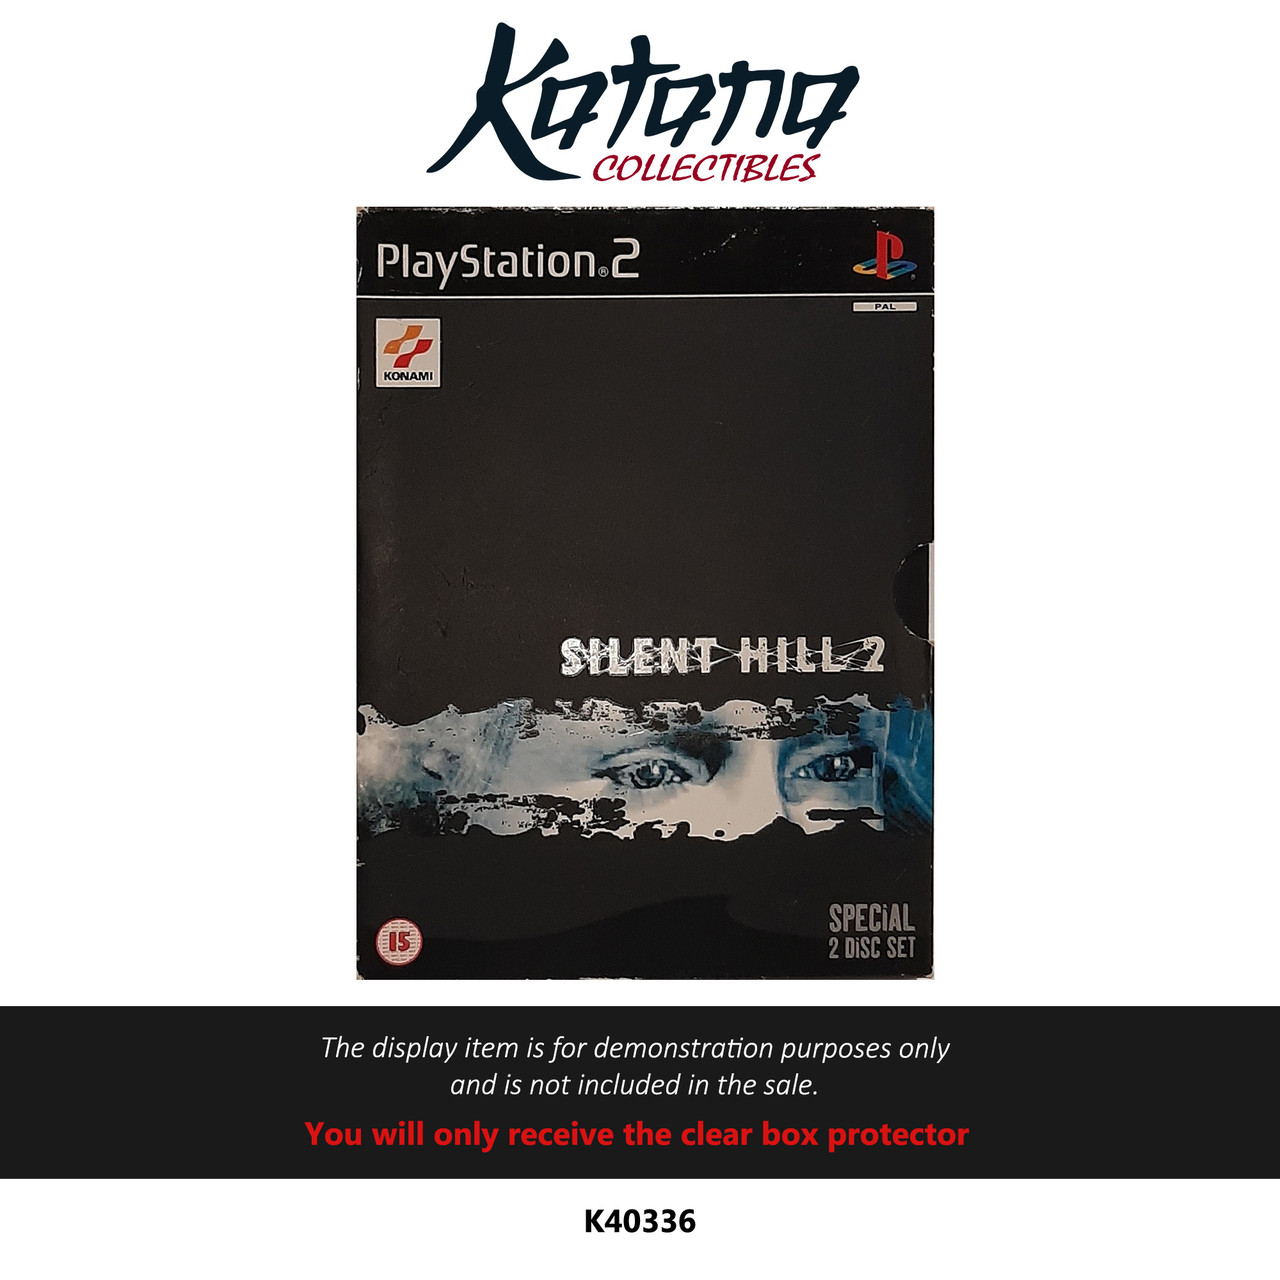 Katana Collectibles Protector For Silent Hill 2 (Special 2 Disc Set) PS2